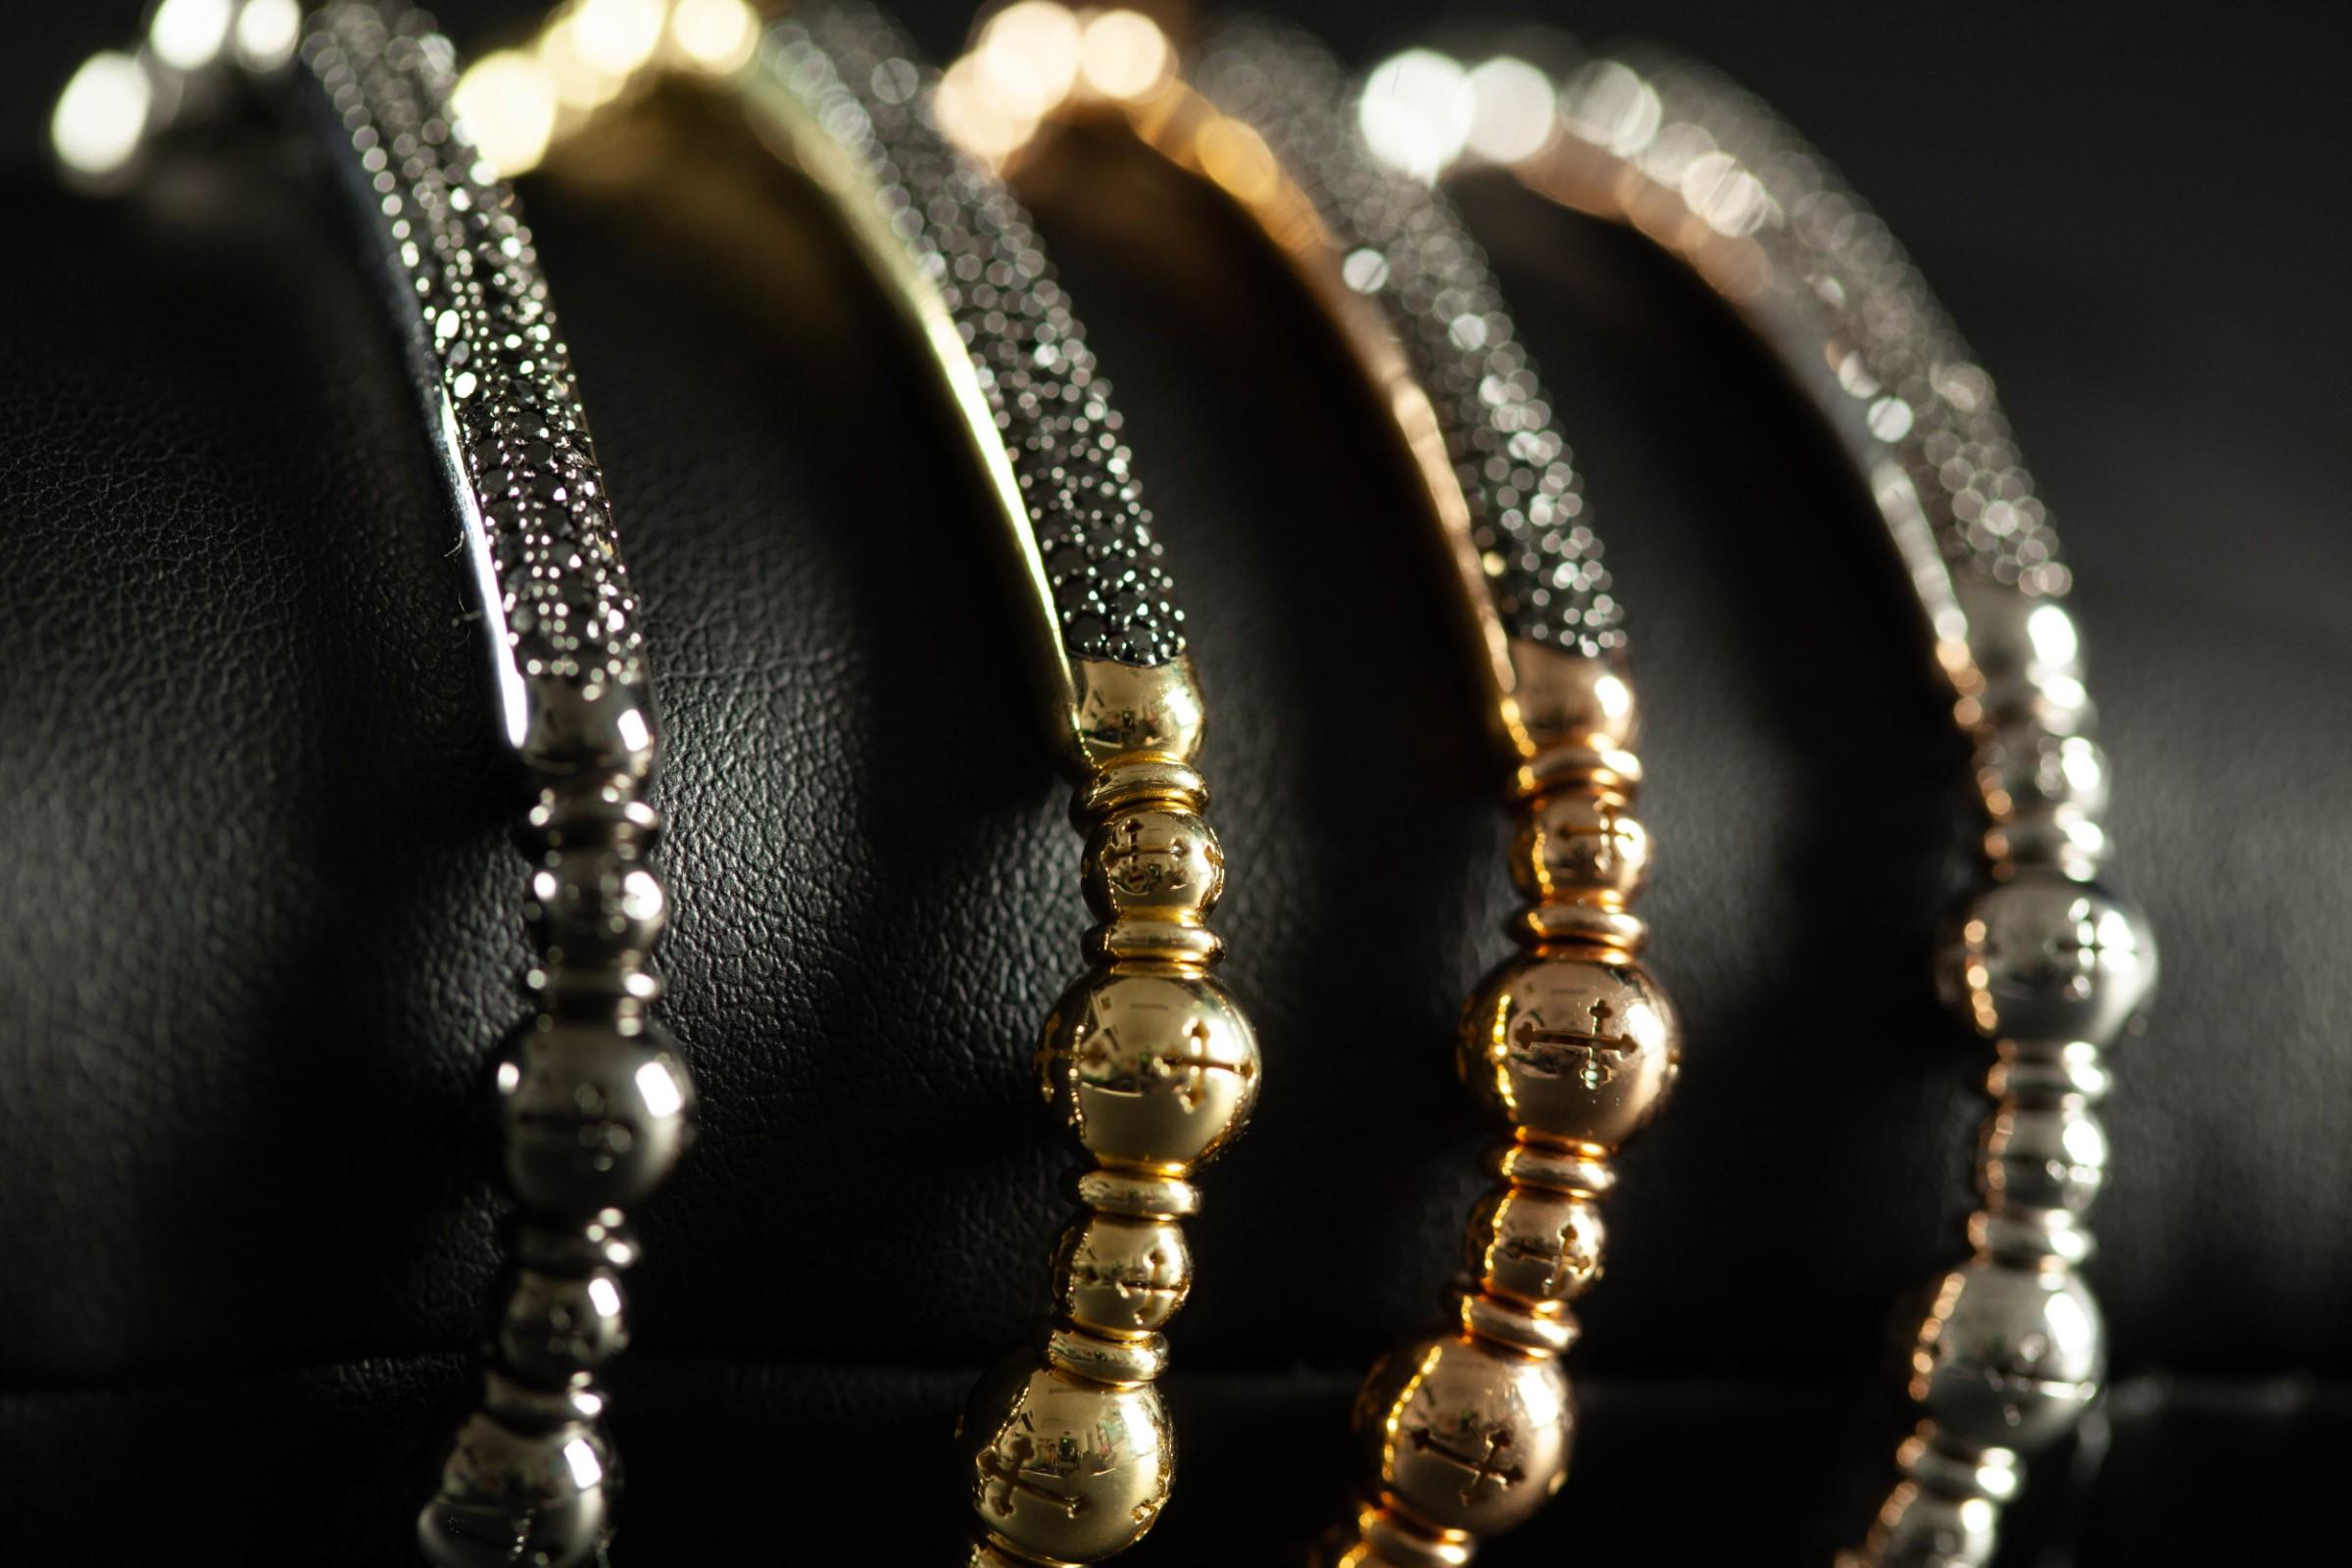 4 Colour 18k Gold Beaded Bracelets with 2.80Ct Black Diamonds 1837 Florence New For Sale 10